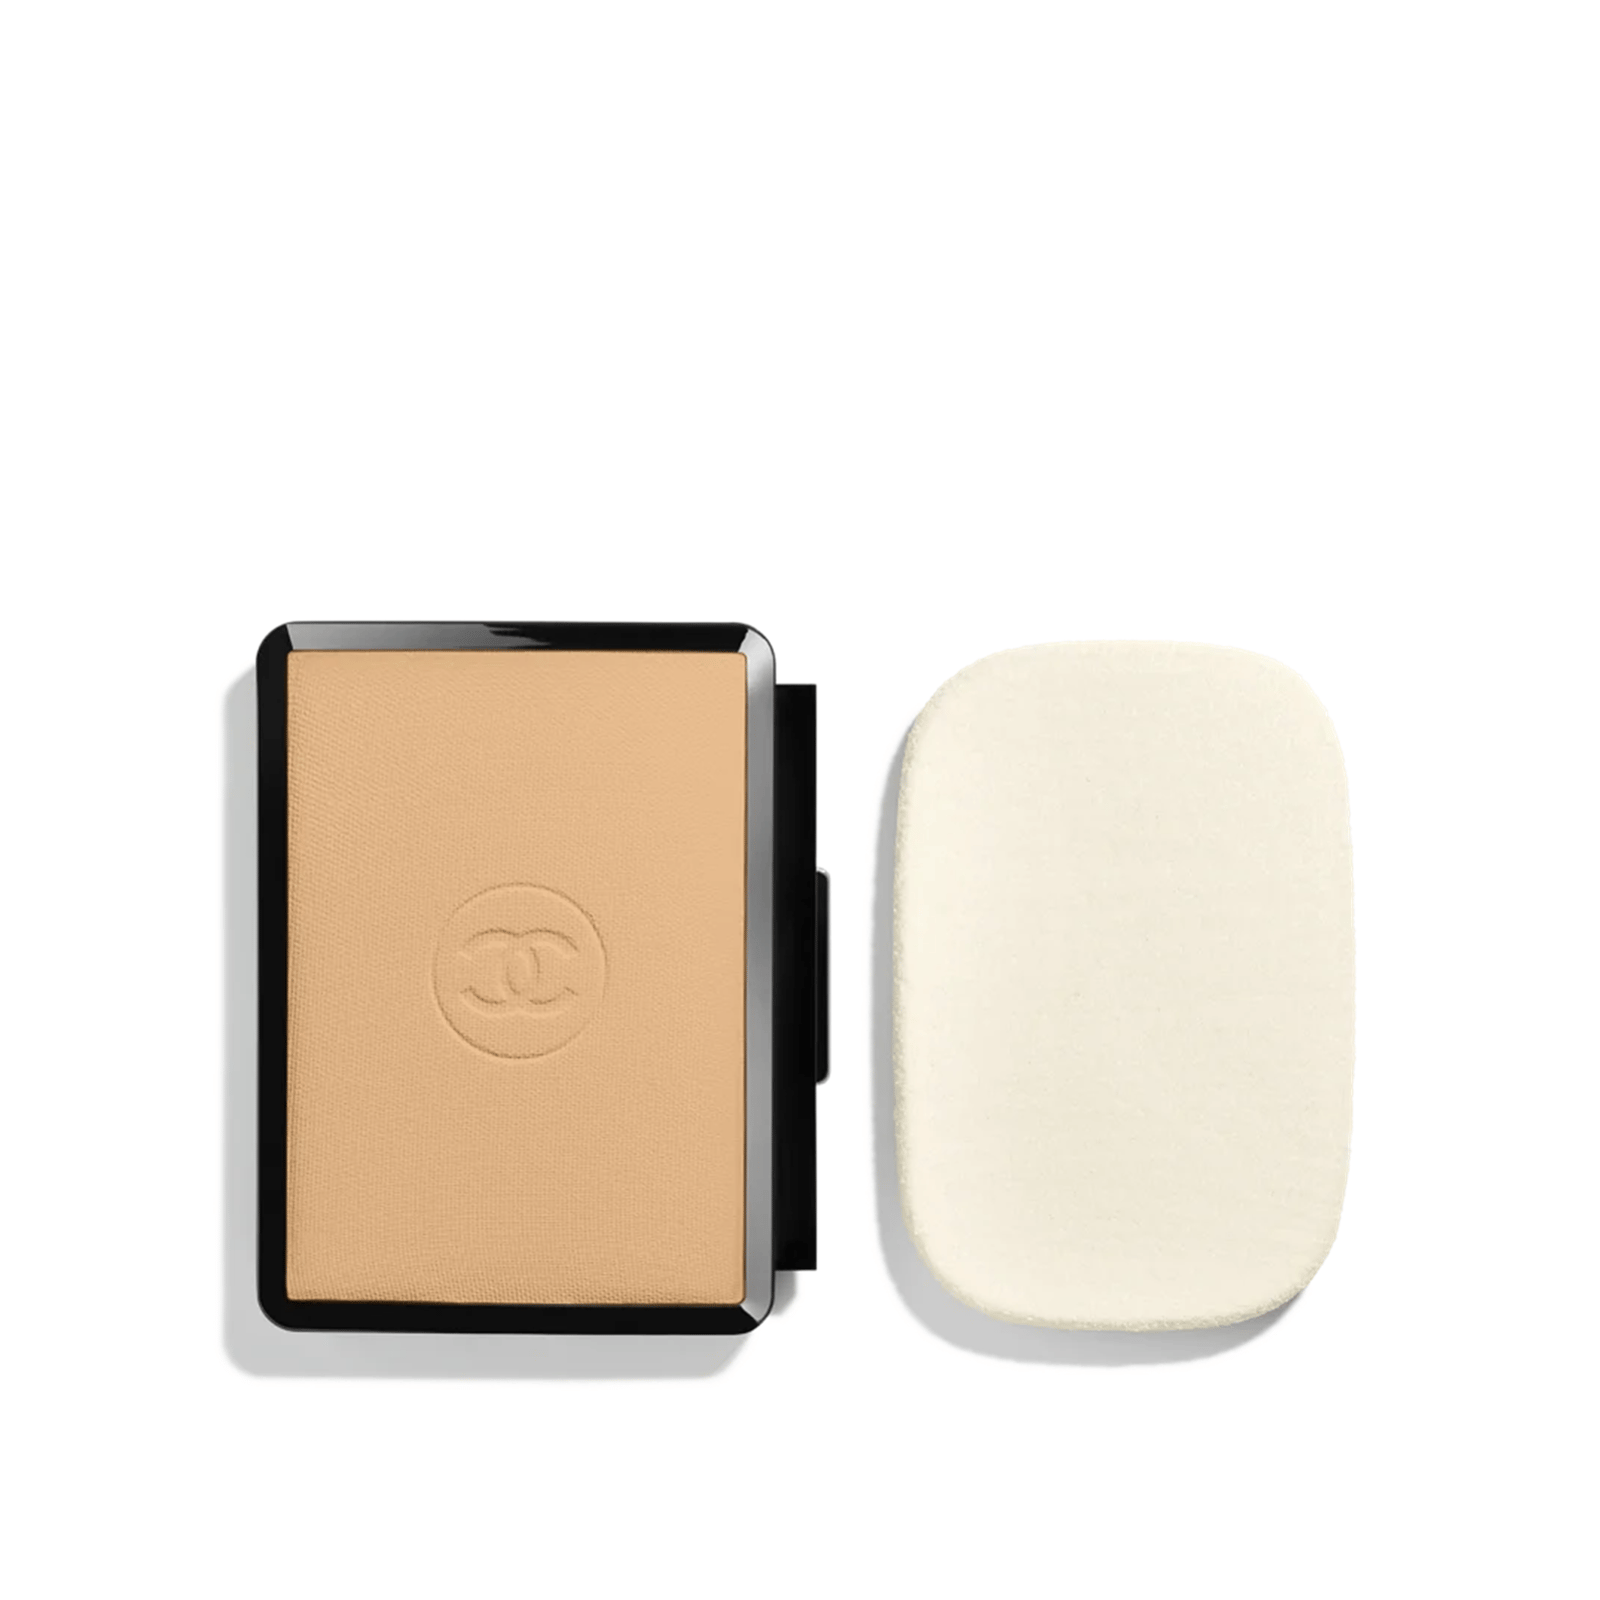 CHANEL Ultra Le Teint Flawless Finish Compact Foundation B70 Refill 13g (0.45 oz)